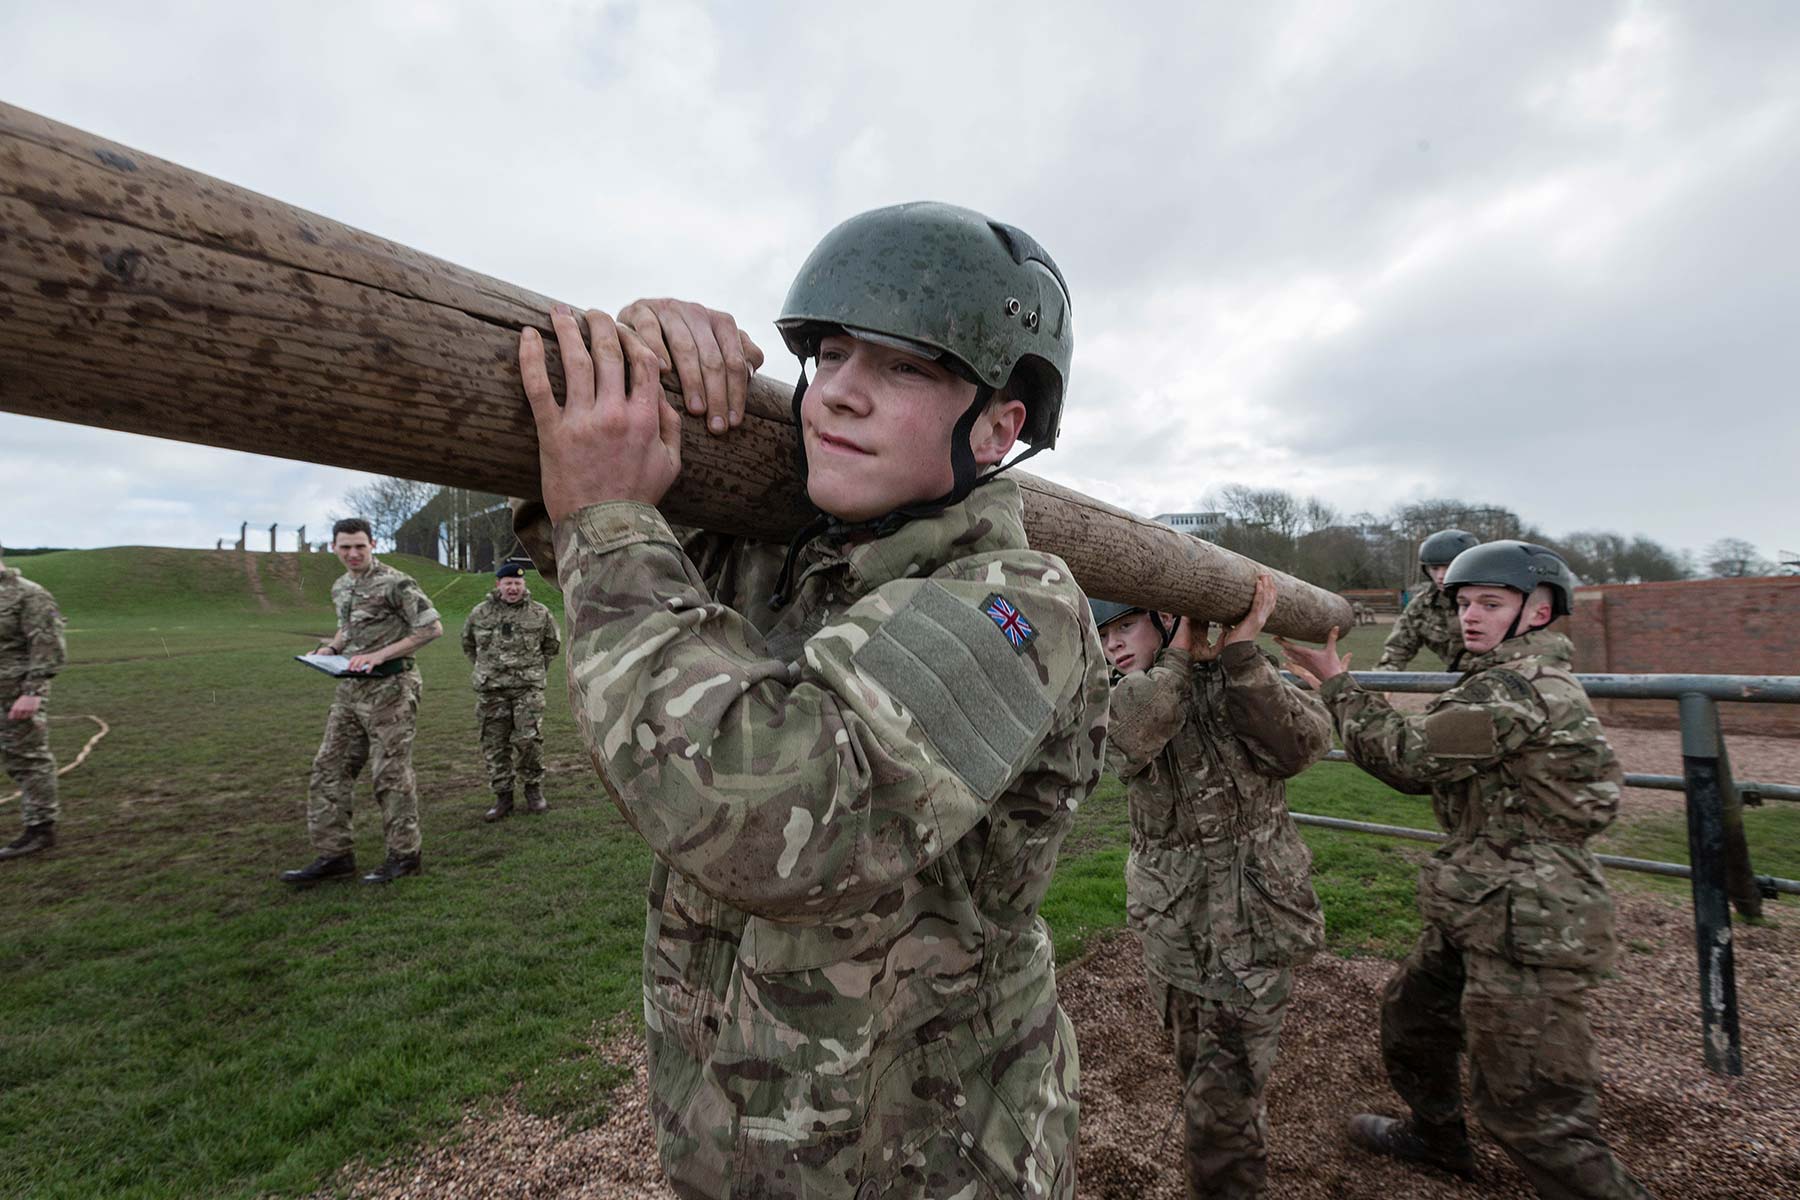 Royal Marine cadets working as a team to carry a log